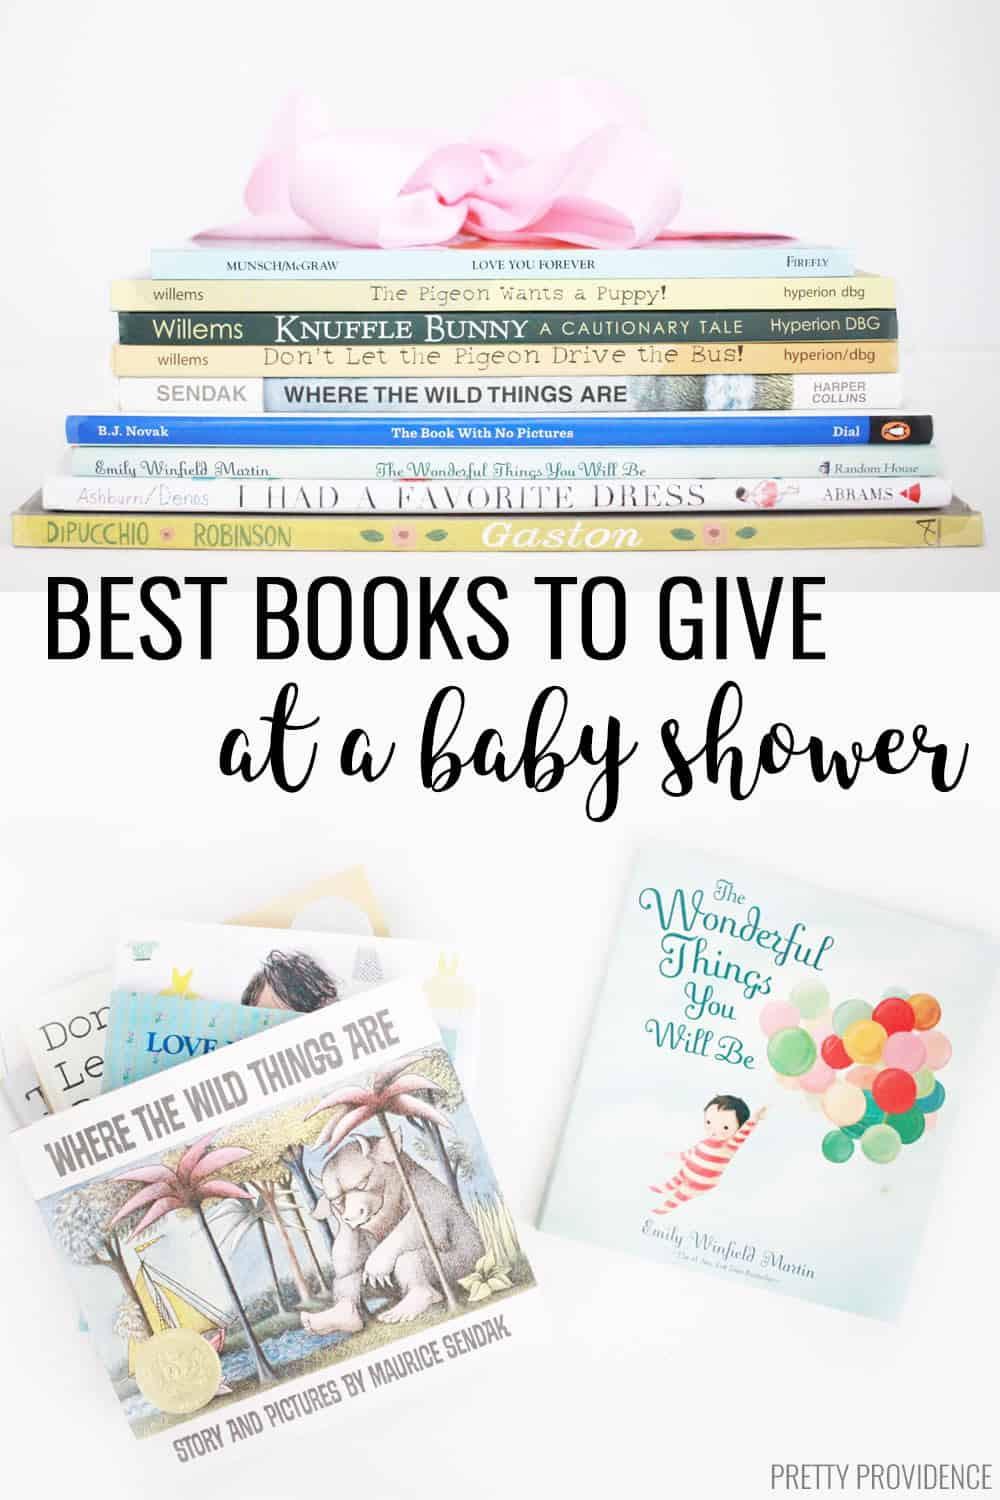 Best Baby Gift Ideas
 Best Books to Give at a Baby Shower Pretty Providence